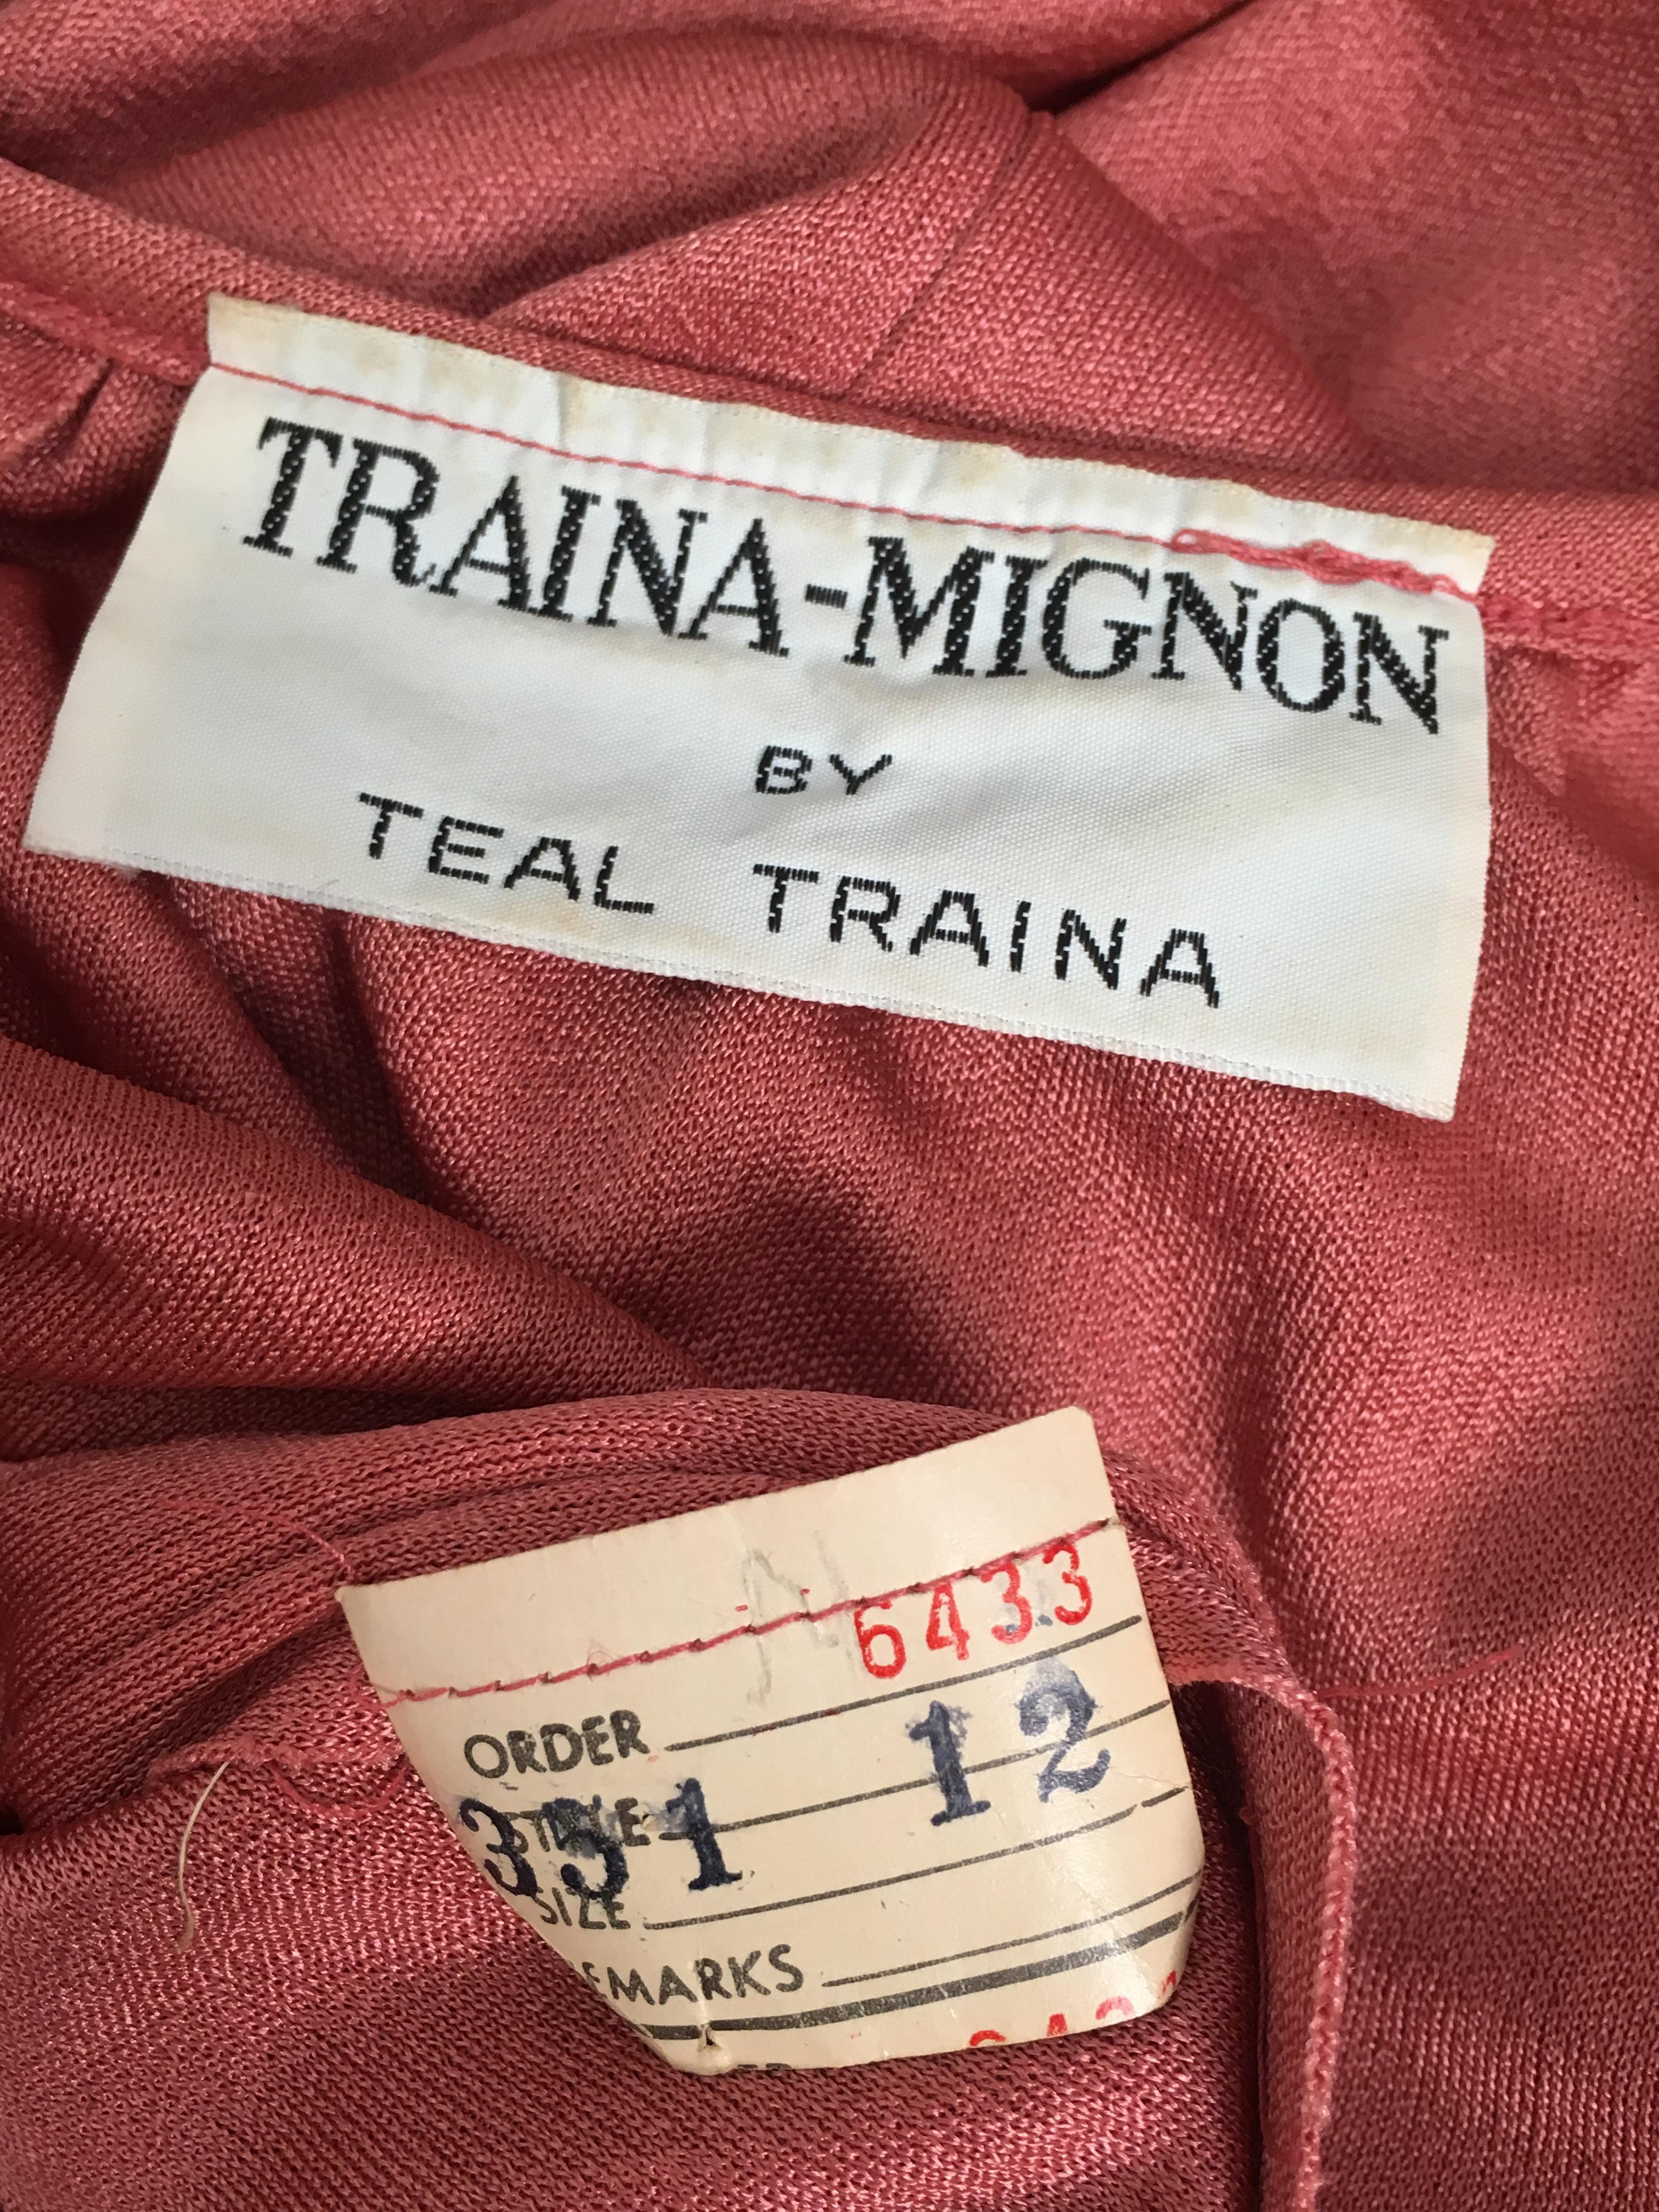 Teal-Mignon by Teal Traina 1970s Rose Jersey Blouse Size Large. For Sale 10